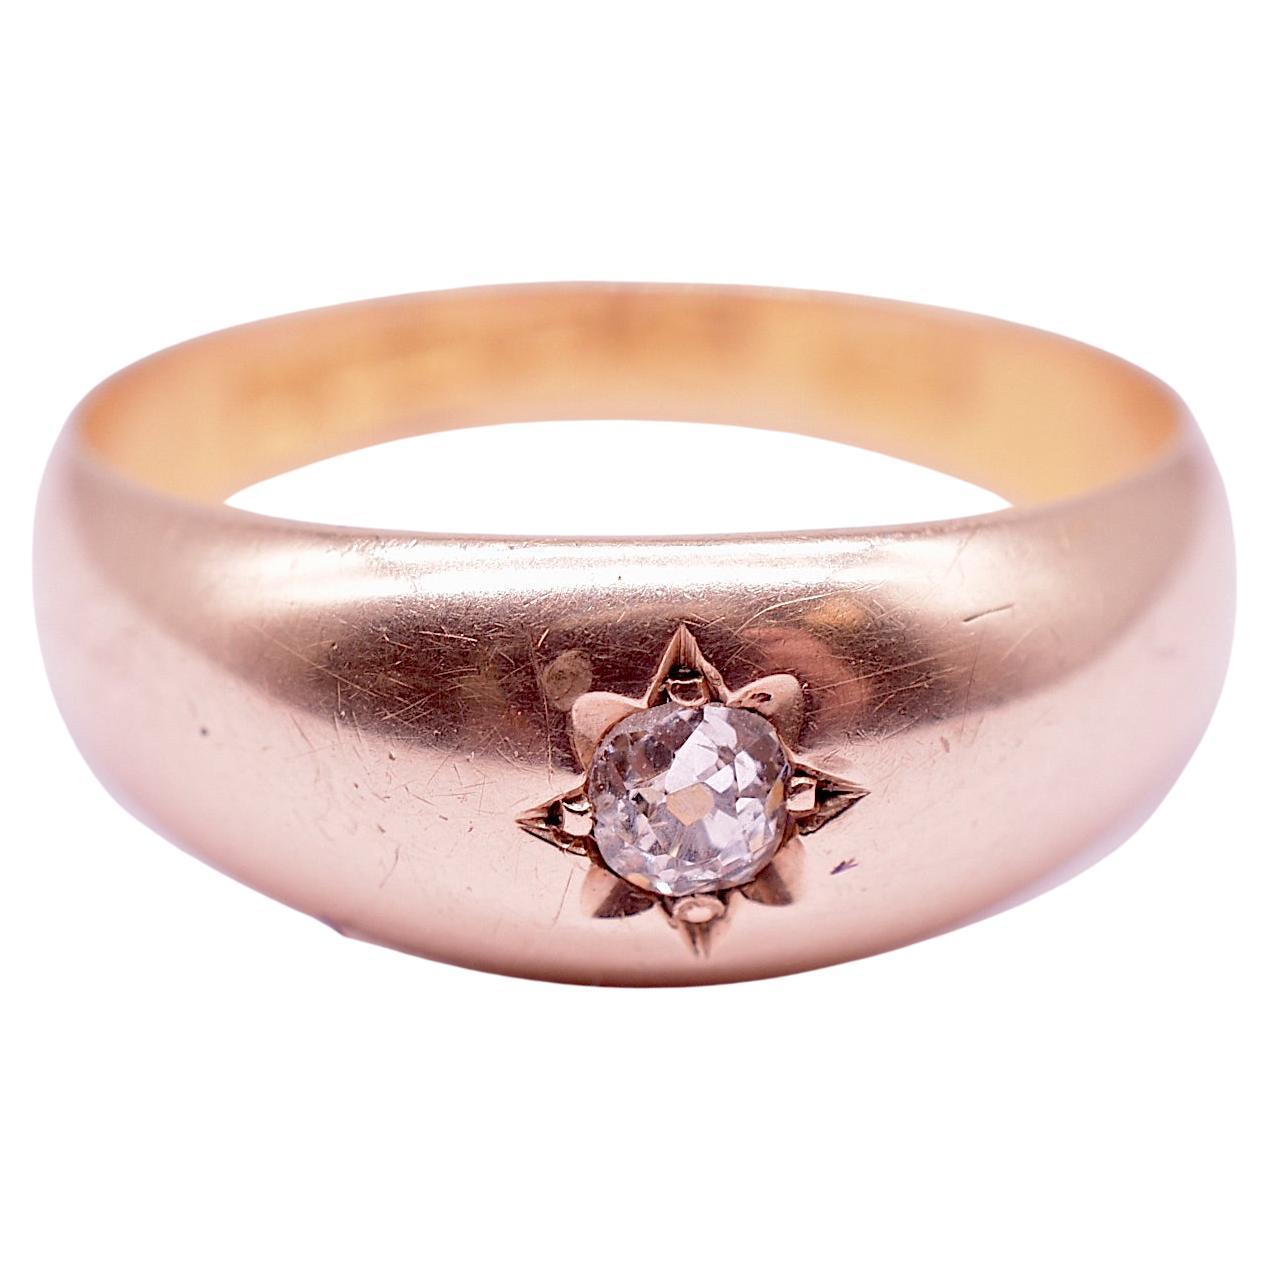 Charming 15K Victorian surface mount ring with a single old mine cut diamond securely imbedded in a polished gold band. The ring is hallmarked for Chester 1890. This type of setting was popular through the late 19th century and well into the 20th.